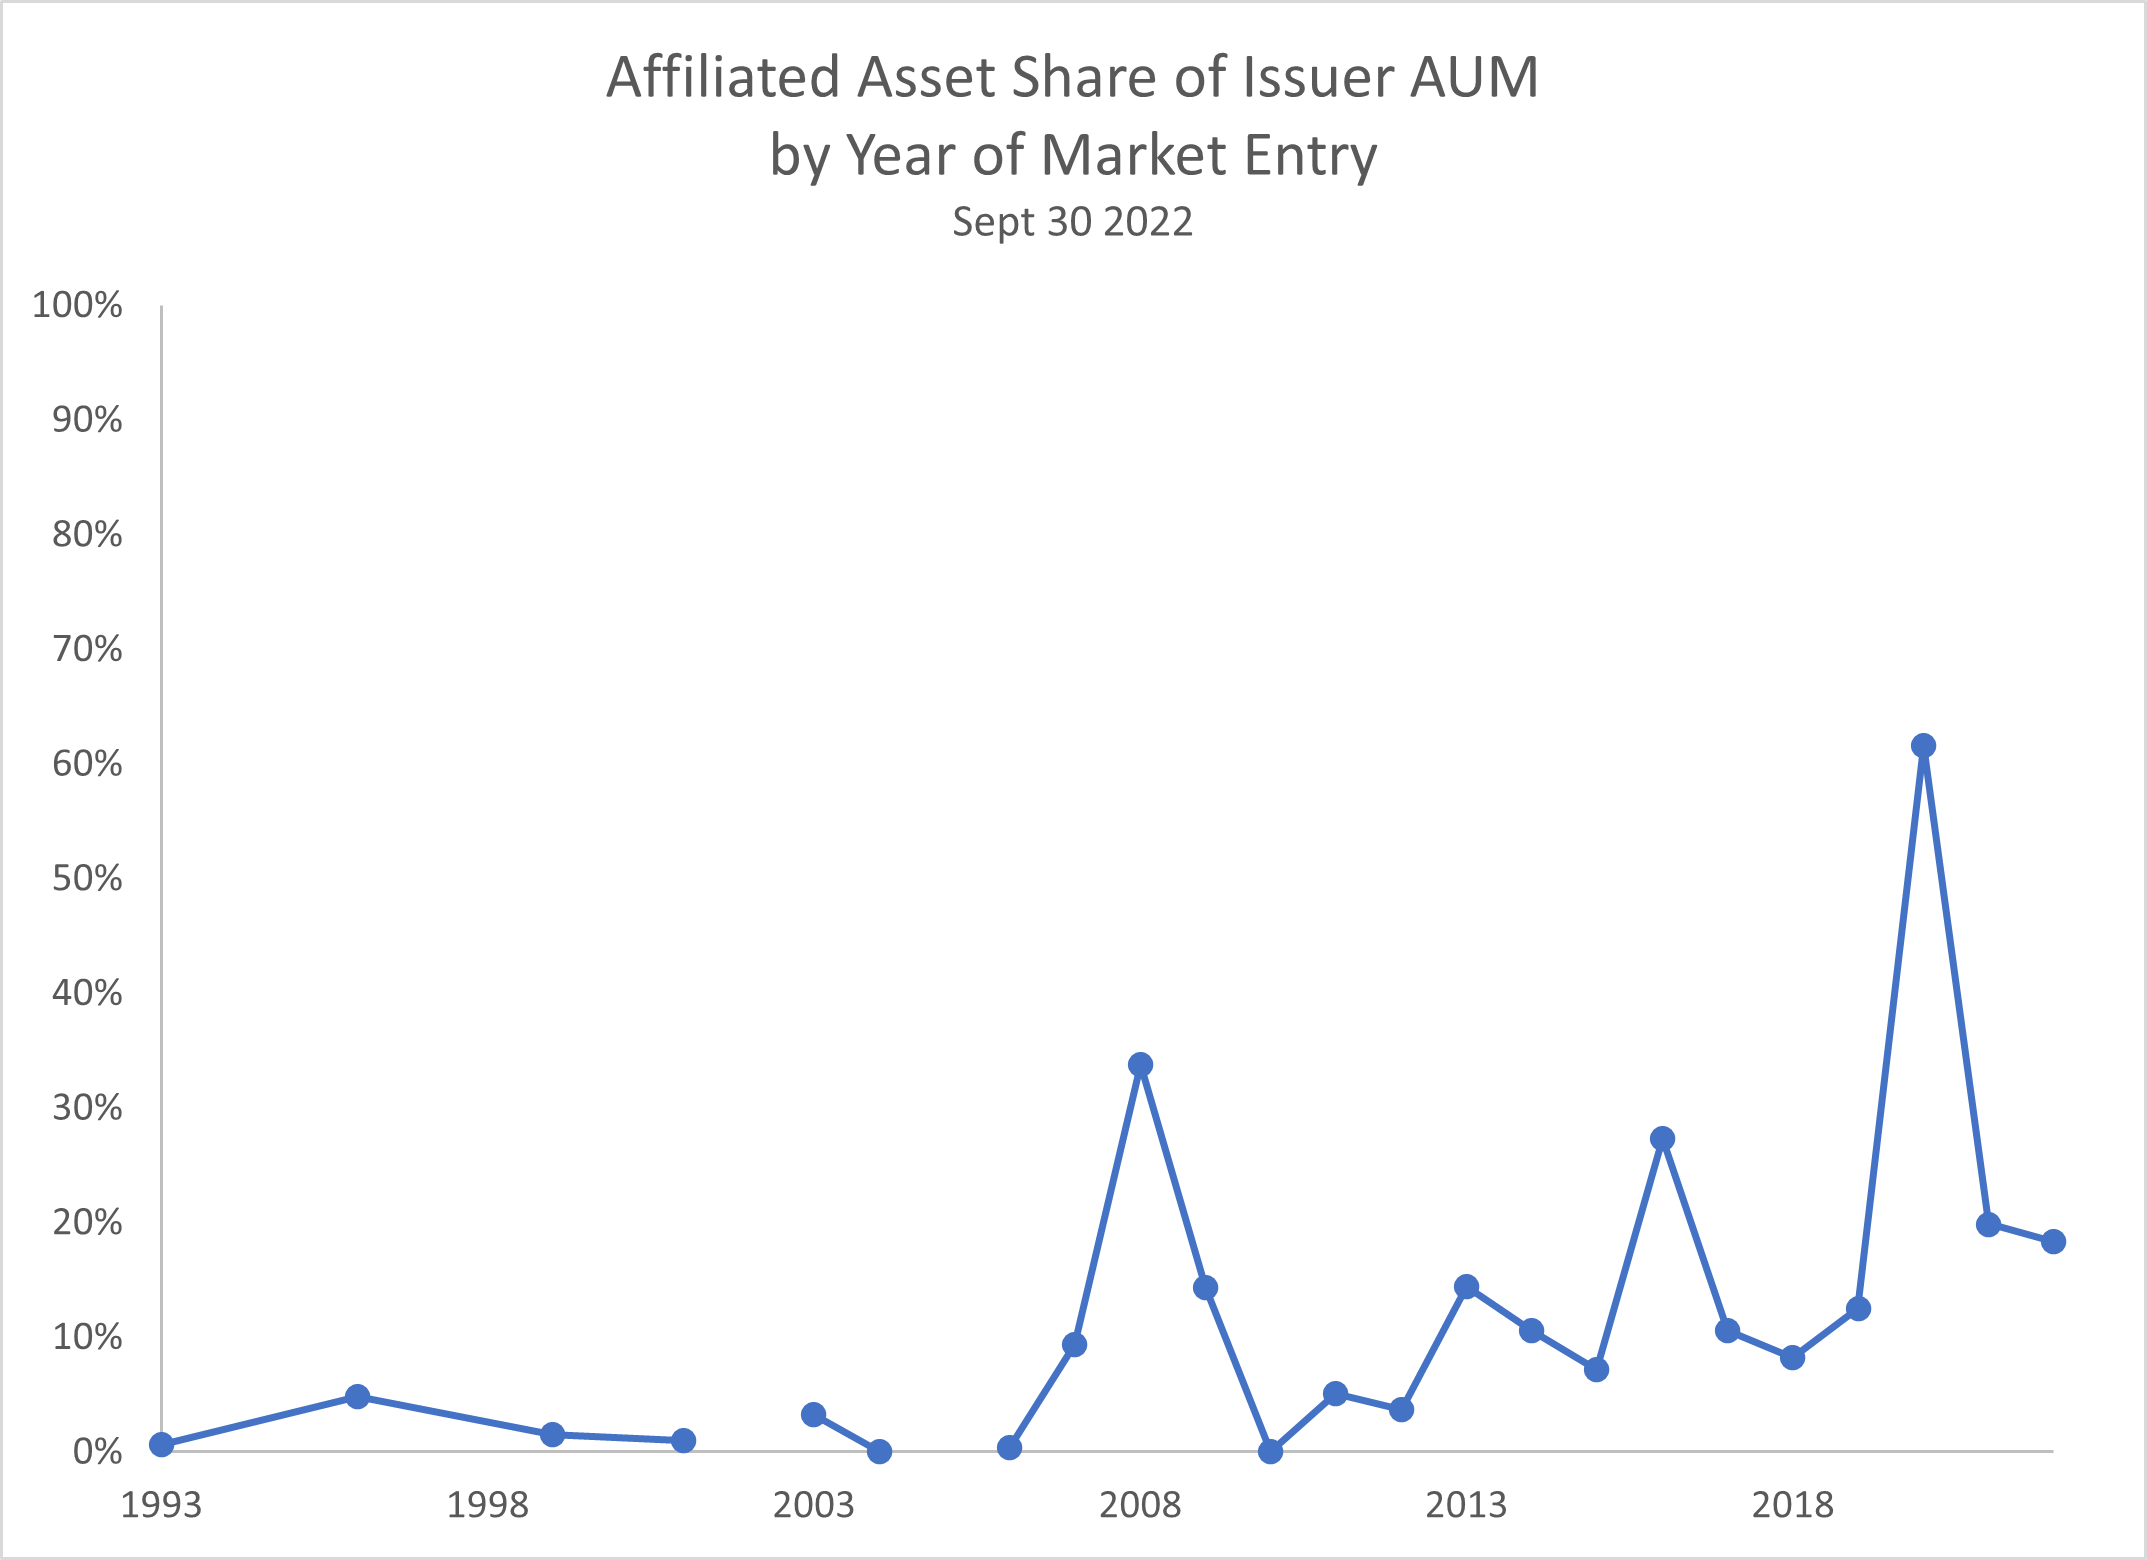 04-Issuer's Related Asset Share -Aum-Market Entry by Year-